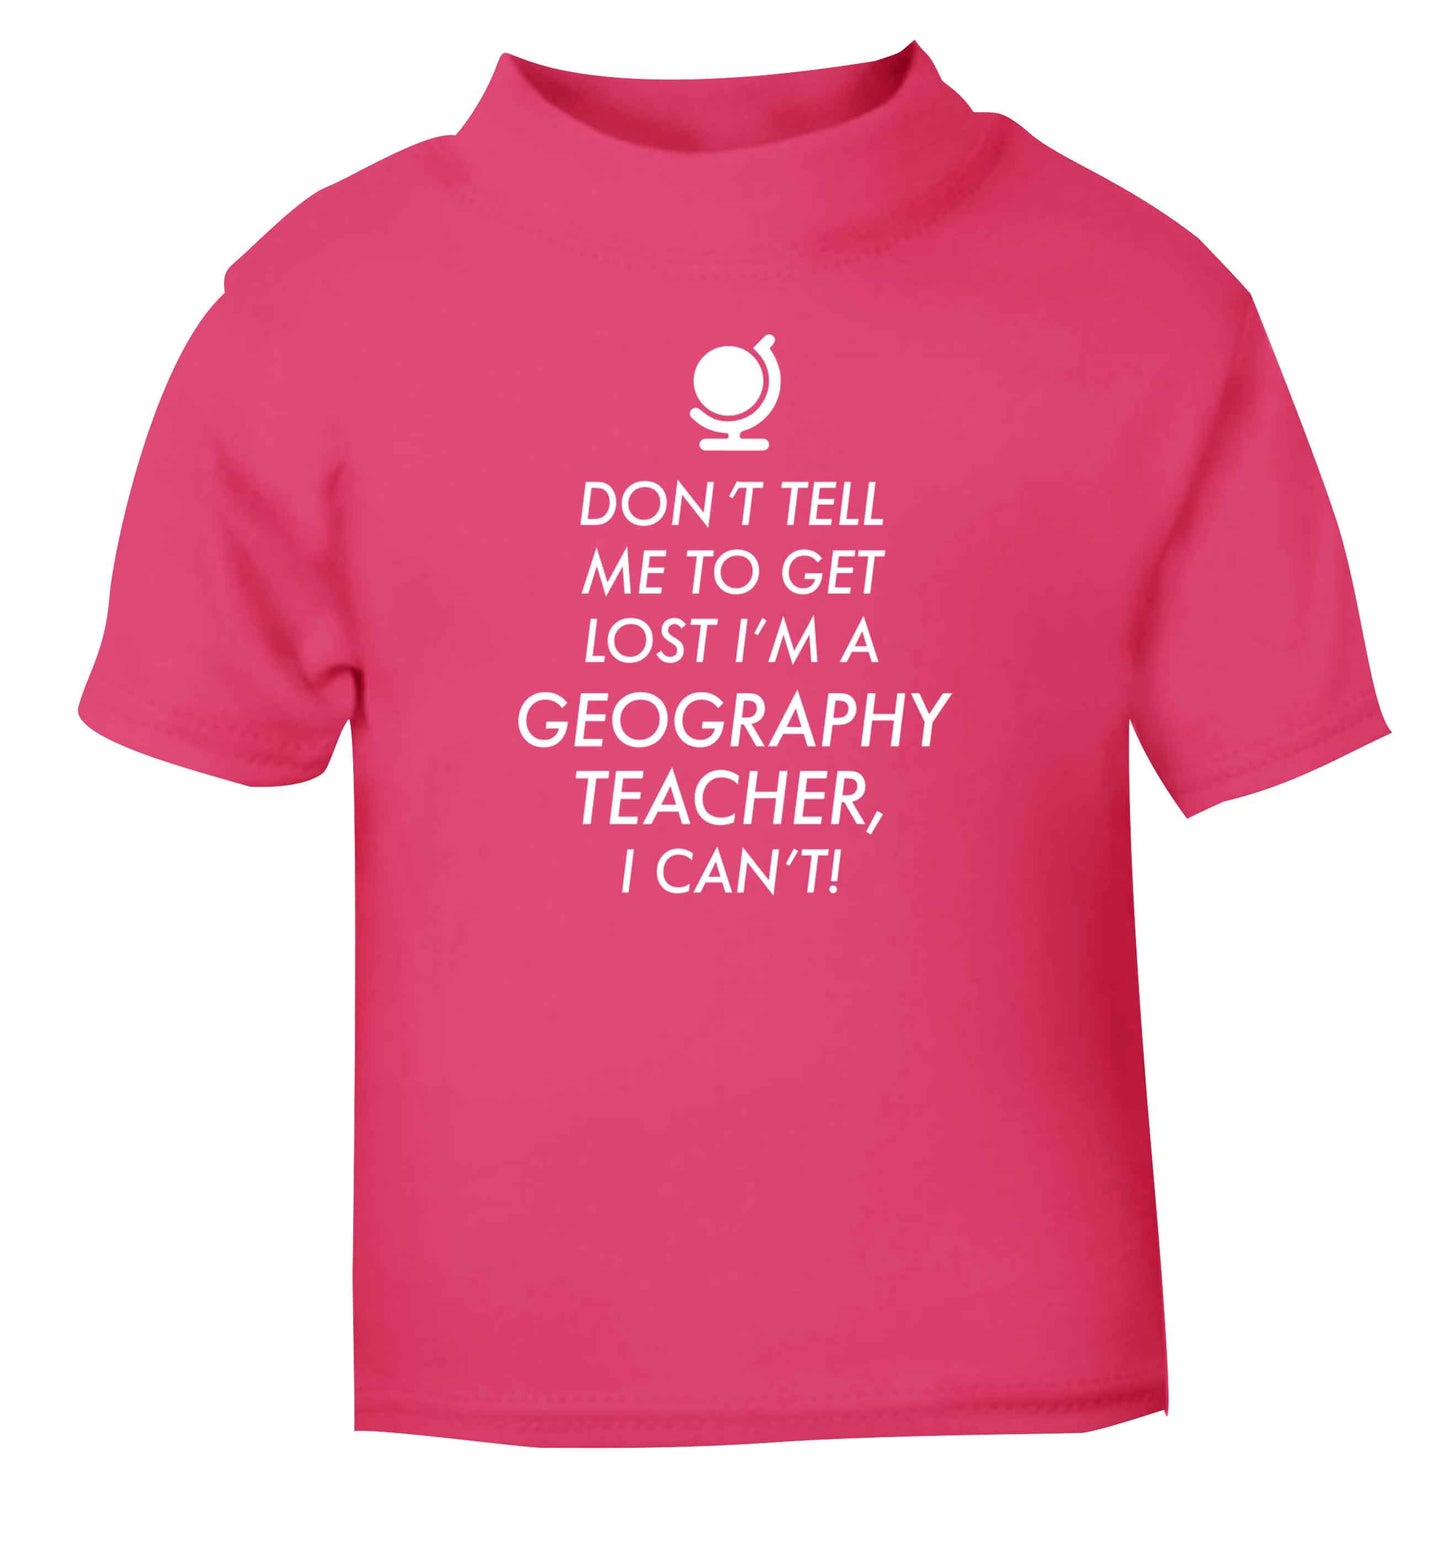 Don't tell me to get lost I'm a geography teacher, I can't pink Baby Toddler Tshirt 2 Years